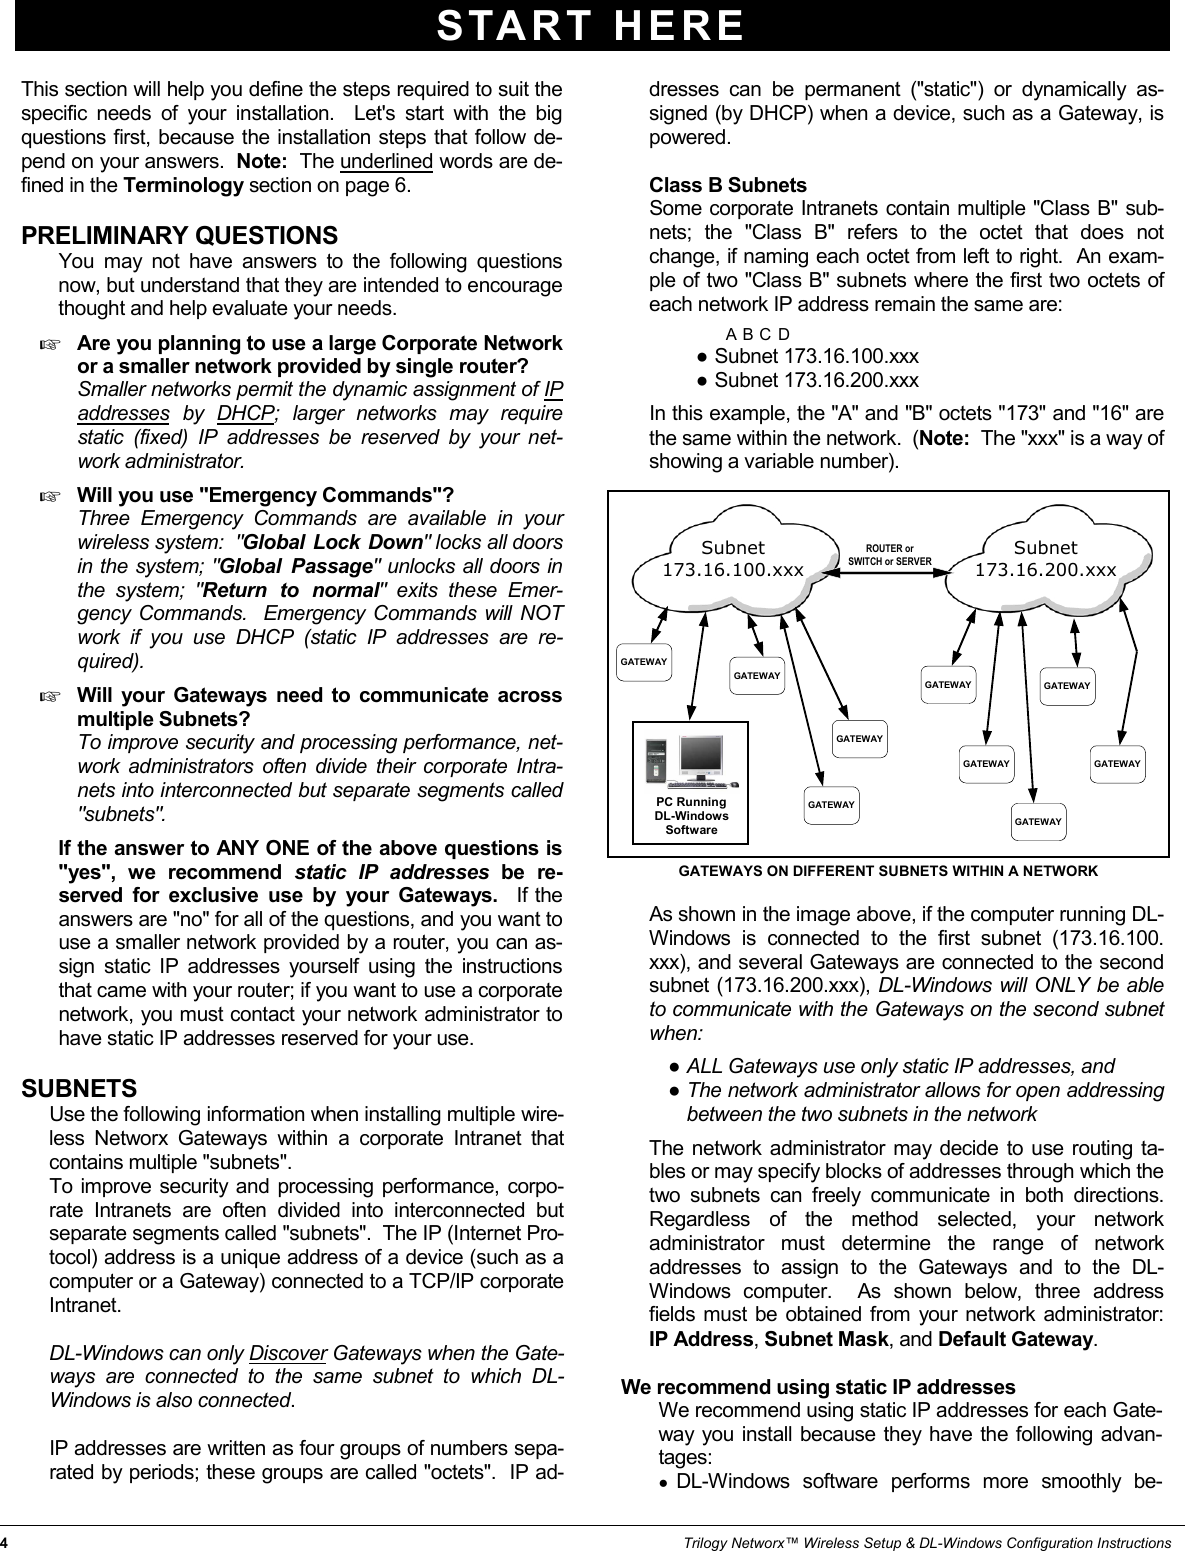 4                                                                                                                                                                   Trilogy Networx™ Wireless Setup &amp; DL-Windows Configuration Instructions START HERE This section will help you define the steps required to suit the specific needs of your installation.  Let&apos;s start with the big questions first, because the installation steps that follow de-pend on your answers.  Note:  The underlined words are de-fined in the Terminology section on page 6.  PRELIMINARY QUESTIONS        You may not have answers to the following questions now, but understand that they are intended to encourage thought and help evaluate your needs.    Are you planning to use a large Corporate Network or a smaller network provided by single router?         Smaller networks permit the dynamic assignment of IP addresses by DHCP; larger networks may require static (fixed) IP addresses be reserved by your net-work administrator.  Will you use &quot;Emergency Commands&quot;?         Three Emergency Commands are available in your wireless system:  &quot;Global Lock Down&quot; locks all doors in the system; &quot;Global Passage&quot; unlocks all doors in the system; &quot;Return to normal&quot; exits these Emer-gency Commands.  Emergency Commands will NOT work if you use DHCP (static IP addresses are re-quired).    Will your Gateways need to communicate across multiple Subnets?         To improve security and processing performance, net-work administrators often divide their corporate Intra-nets into interconnected but separate segments called &quot;subnets&quot;.         If the answer to ANY ONE of the above questions is &quot;yes&quot;, we recommend static IP addresses be re-served for exclusive use by your Gateways.  If the answers are &quot;no&quot; for all of the questions, and you want to use a smaller network provided by a router, you can as-sign static IP addresses yourself using the instructions that came with your router; if you want to use a corporate network, you must contact your network administrator to have static IP addresses reserved for your use.    SUBNETS       Use the following information when installing multiple wire-less Networx Gateways within a corporate Intranet that contains multiple &quot;subnets&quot;.      To improve security and processing performance, corpo-rate Intranets are often divided into interconnected but separate segments called &quot;subnets&quot;.  The IP (Internet Pro-tocol) address is a unique address of a device (such as a computer or a Gateway) connected to a TCP/IP corporate Intranet.          DL-Windows can only Discover Gateways when the Gate-ways are connected to the same subnet to which DL-Windows is also connected.          IP addresses are written as four groups of numbers sepa-rated by periods; these groups are called &quot;octets&quot;.  IP ad-dresses can be permanent (&quot;static&quot;) or dynamically as-signed (by DHCP) when a device, such as a Gateway, is powered.         Class B Subnets      Some corporate Intranets contain multiple &quot;Class B&quot; sub-nets; the &quot;Class B&quot; refers to the octet that does not change, if naming each octet from left to right.  An exam-ple of two &quot;Class B&quot; subnets where the first two octets of each network IP address remain the same are:                                                                                                                                                                                        A                                     B                                      C                                             D ●Subnet 173.16.100.xxx ●Subnet 173.16.200.xxx       In this example, the &quot;A&quot; and &quot;B&quot; octets &quot;173&quot; and &quot;16&quot; are the same within the network.  (Note:  The &quot;xxx&quot; is a way of showing a variable number).       As shown in the image above, if the computer running DL-Windows is connected to the first subnet (173.16.100.xxx), and several Gateways are connected to the second subnet (173.16.200.xxx), DL-Windows will ONLY be able to communicate with the Gateways on the second subnet when:  ●ALL Gateways use only static IP addresses, and ●The network administrator allows for open addressing between the two subnets in the network         The network administrator may decide to use routing ta-bles or may specify blocks of addresses through which the two subnets can freely communicate in both directions.  Regardless of the method selected, your network administrator must determine the range of network addresses to assign to the Gateways and to the DL-Windows computer.  As shown below, three address fields must be obtained from your network administrator:  IP Address, Subnet Mask, and Default Gateway.  We recommend using static IP addresses        We recommend using static IP addresses for each Gate-way you install because they have the following advan-tages:   ●DL-Windows software performs more smoothly be- Subnet 173.16.100.xxx Subnet 173.16.200.xxx GATEWAYS ON DIFFERENT SUBNETS WITHIN A NETWORK PC Running  DL-Windows  Software  GATEWAY ROUTER or SWITCH or SERVER GATEWAY GATEWAY GATEWAY GATEWAY GATEWAY GATEWAY GATEWAY GATEWAY 